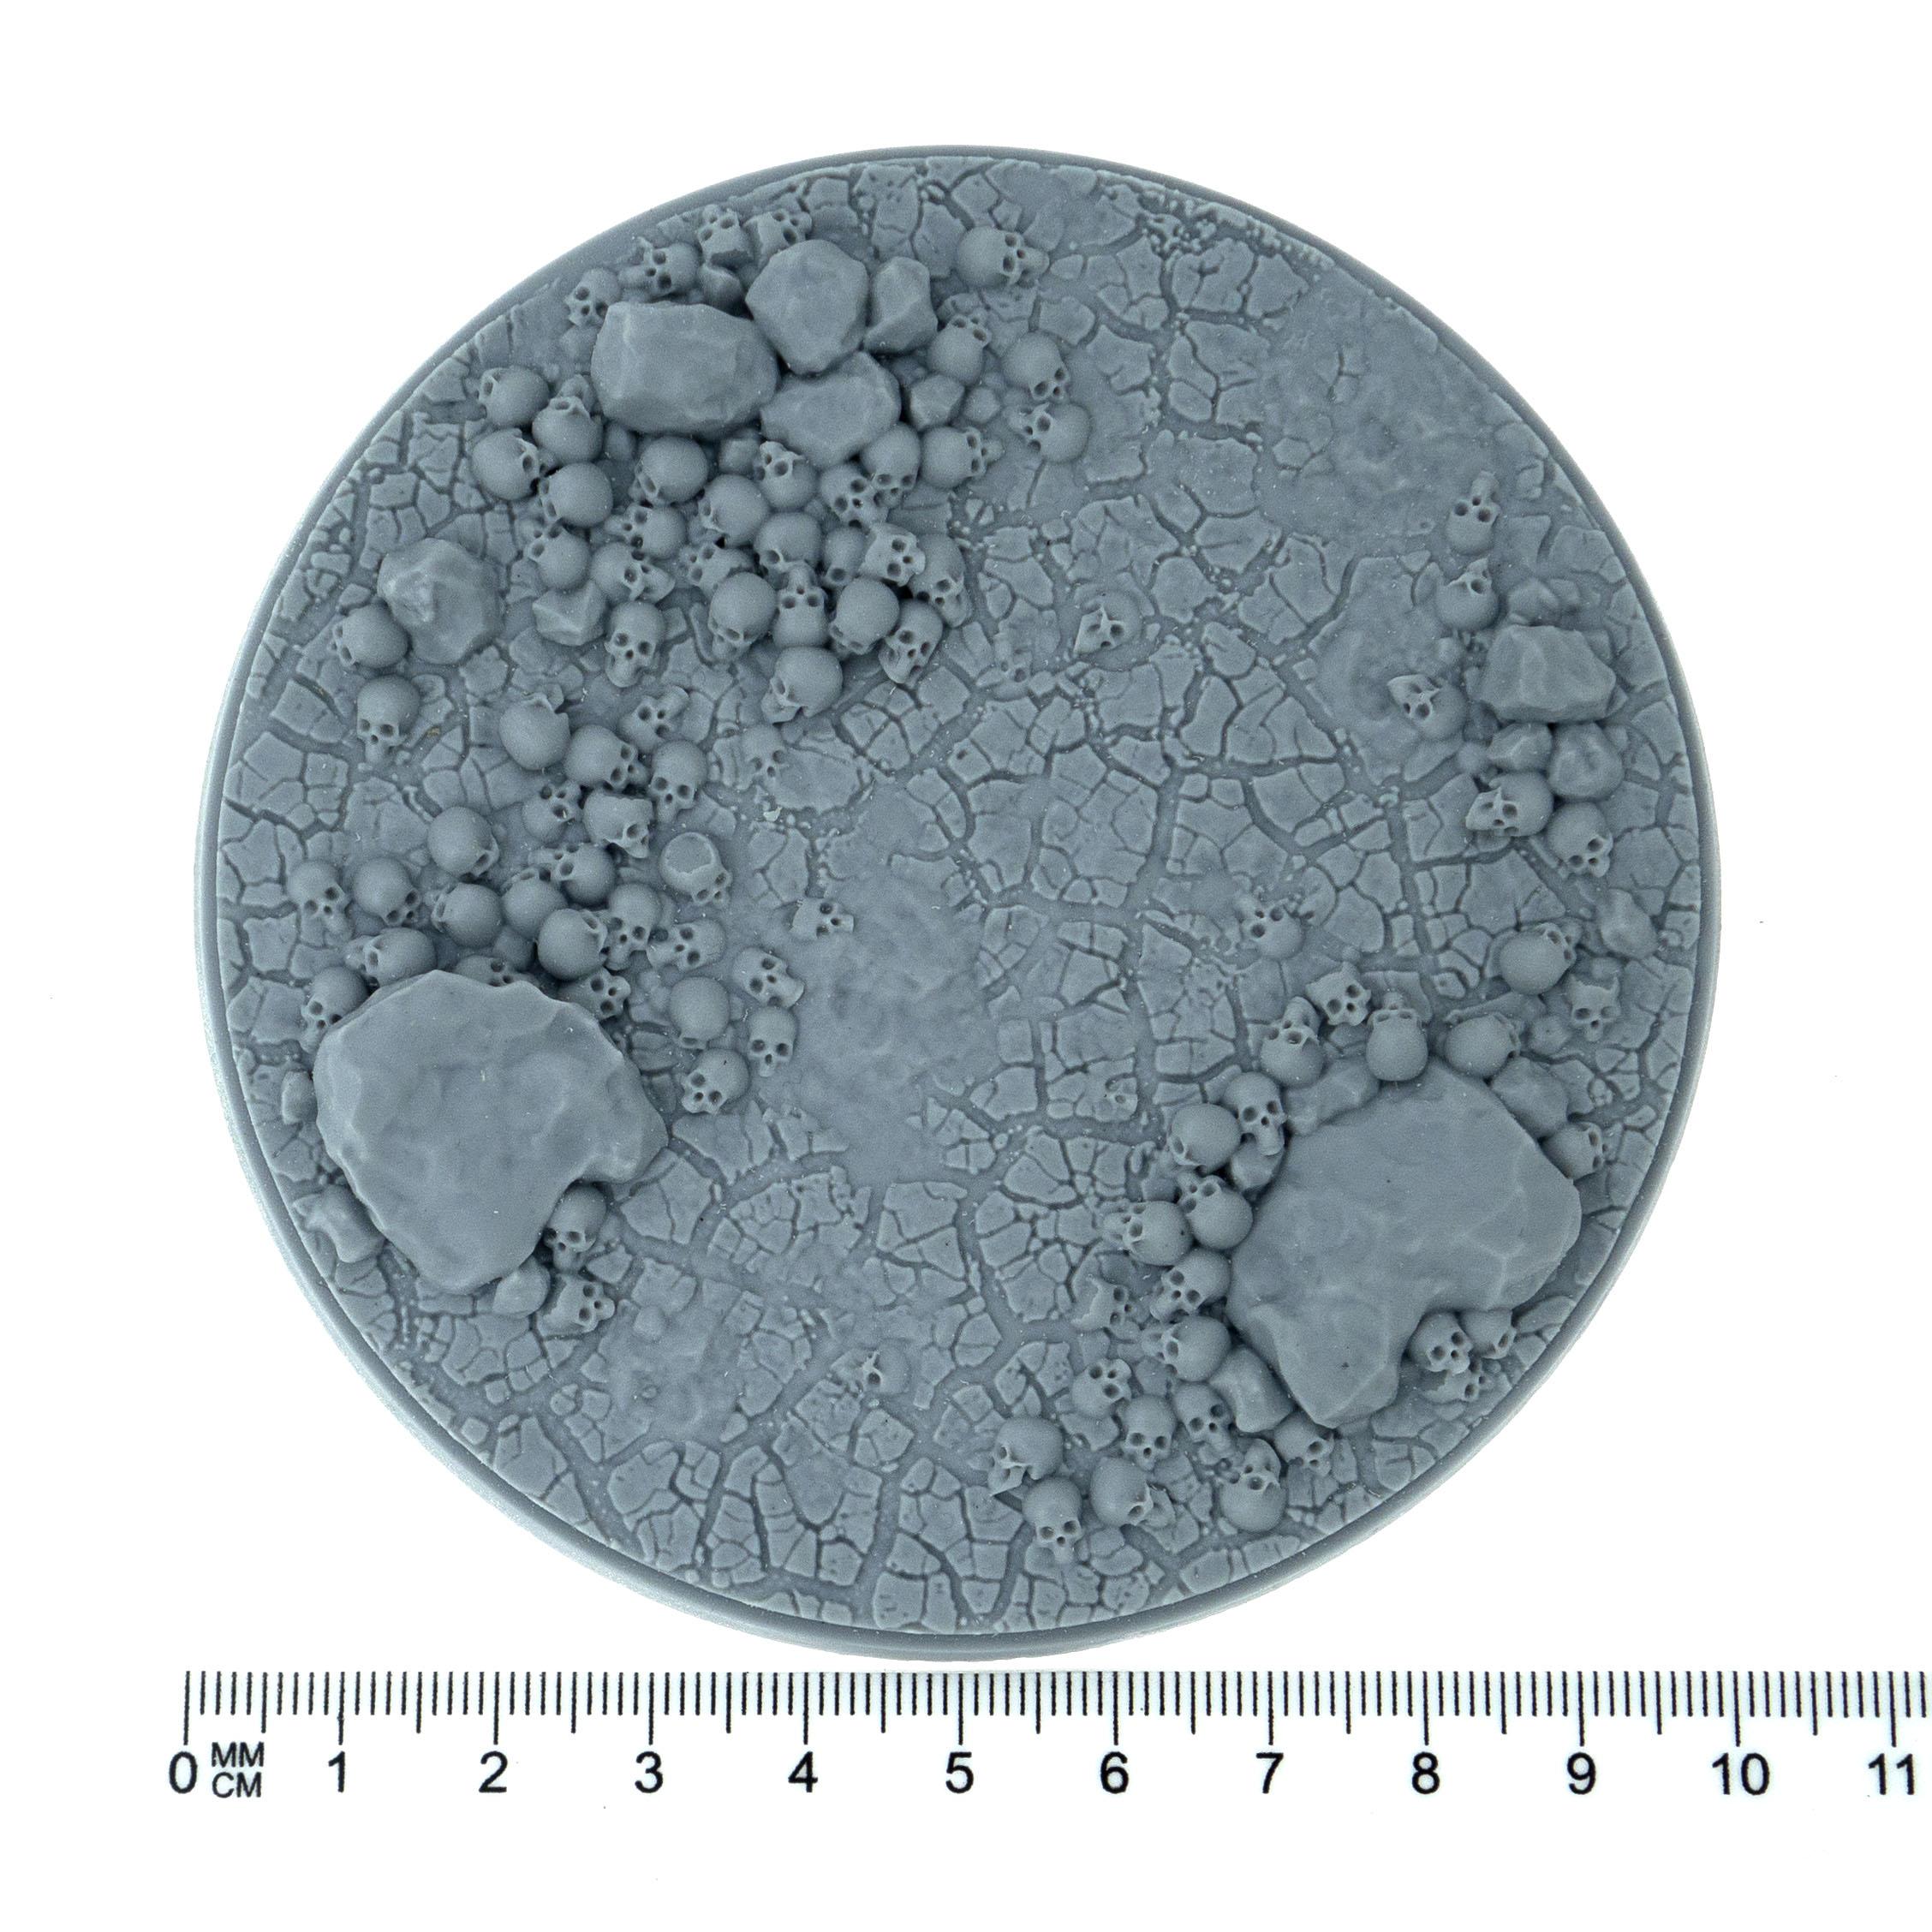 Picture of Bases - Skull Cracked Earth - 100mm - 3rd Image